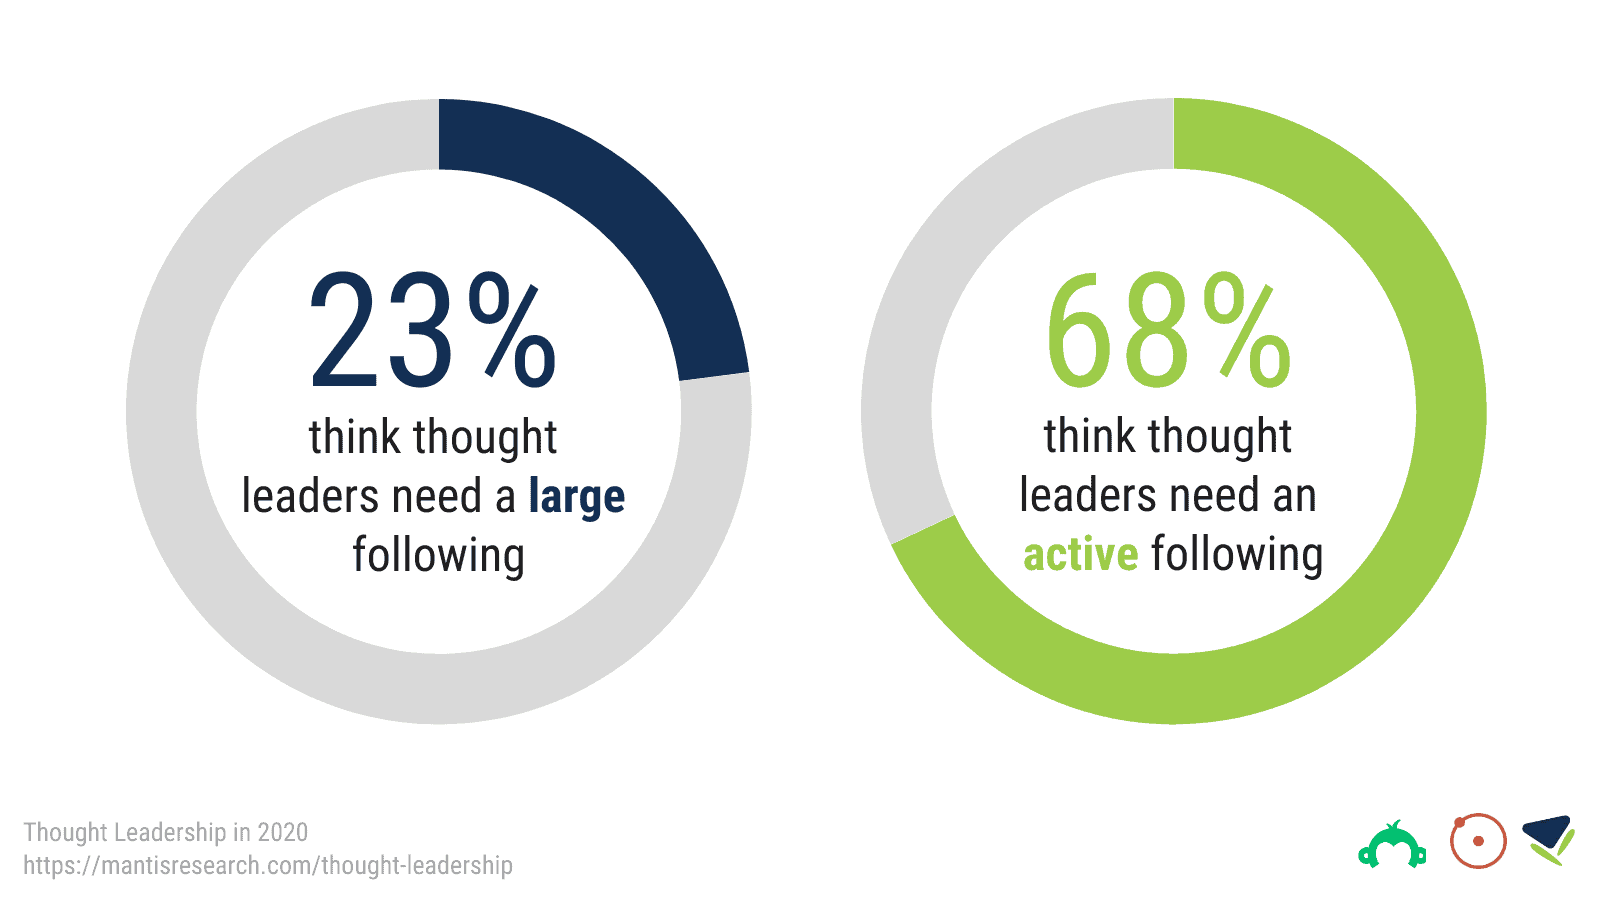 Do Thought Leaders Need A Large Following?